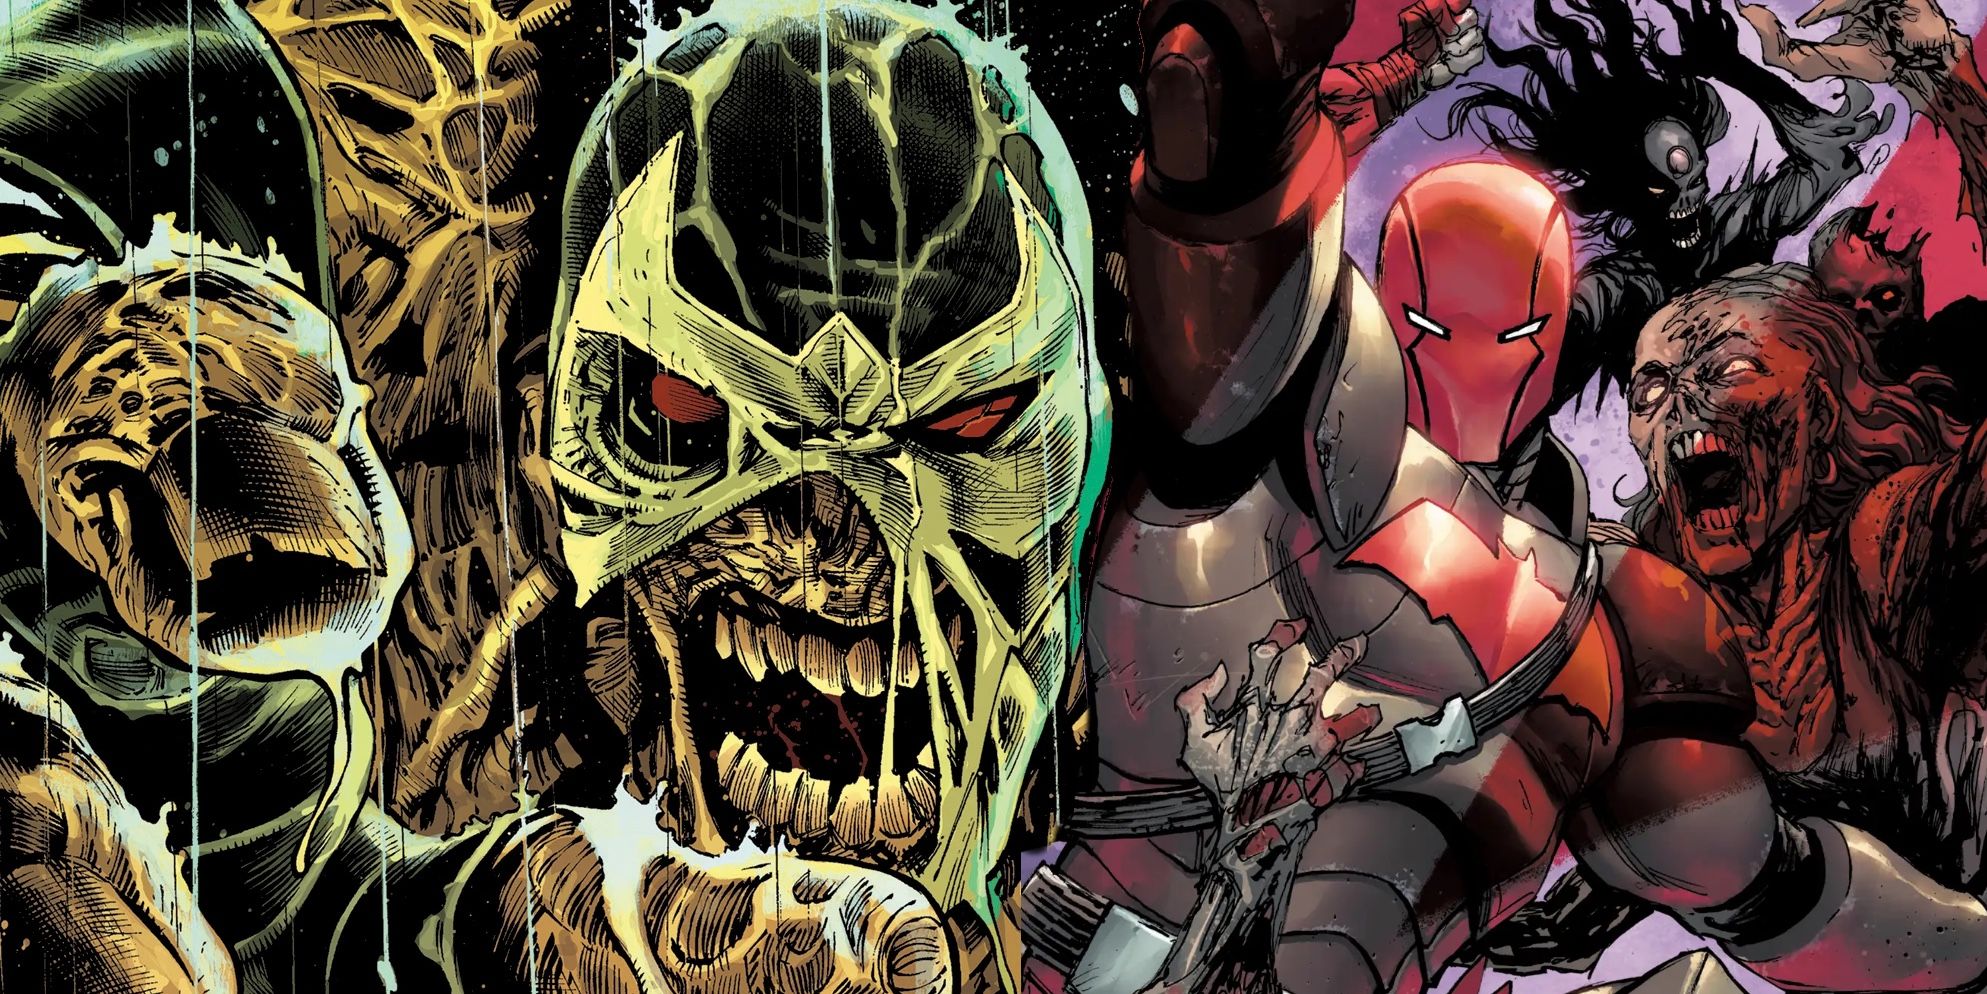 Red Hood is Teaming up With Bane in the Last Way Fans Expect